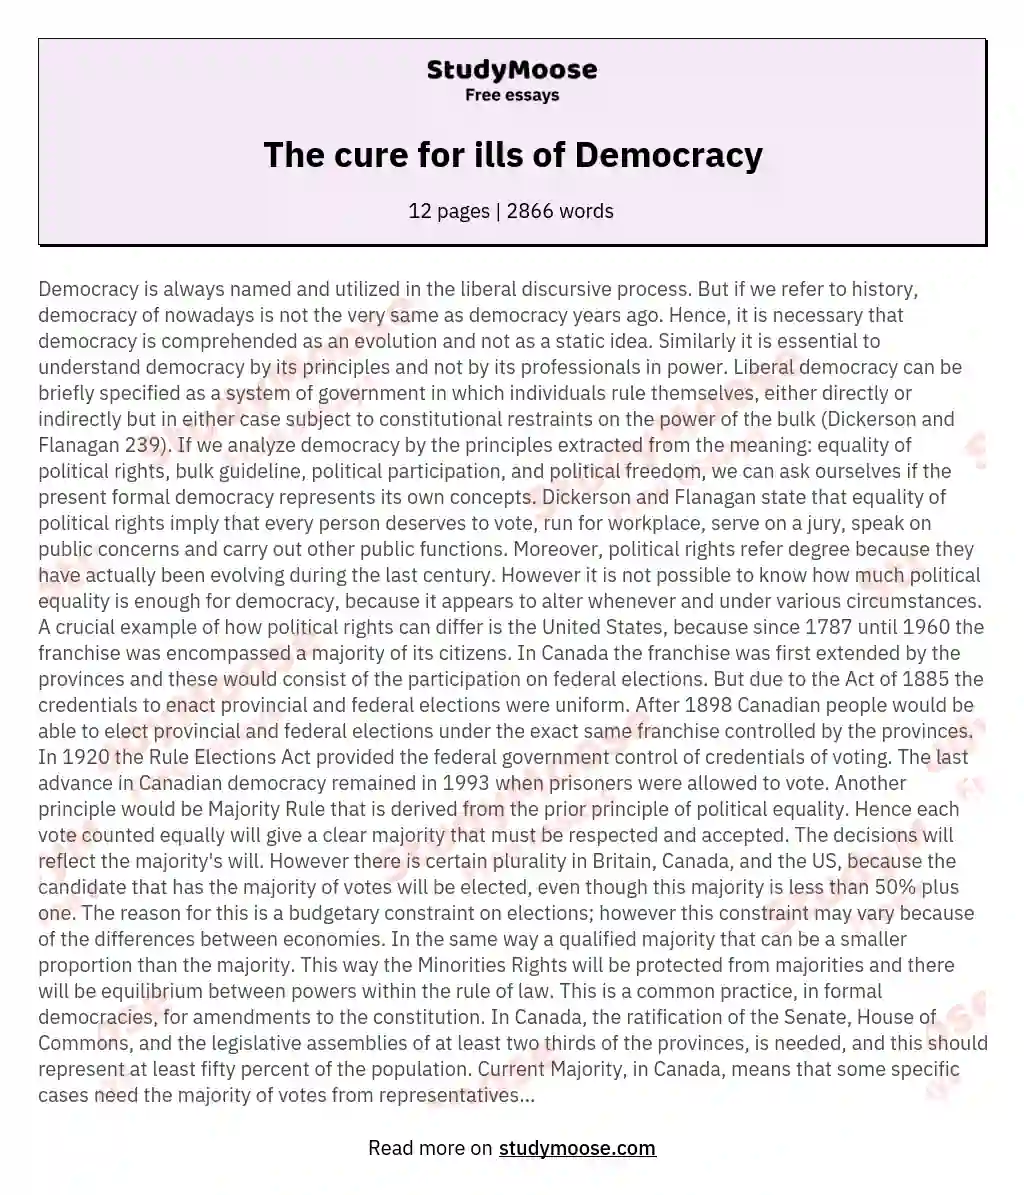 The cure for ills of Democracy essay